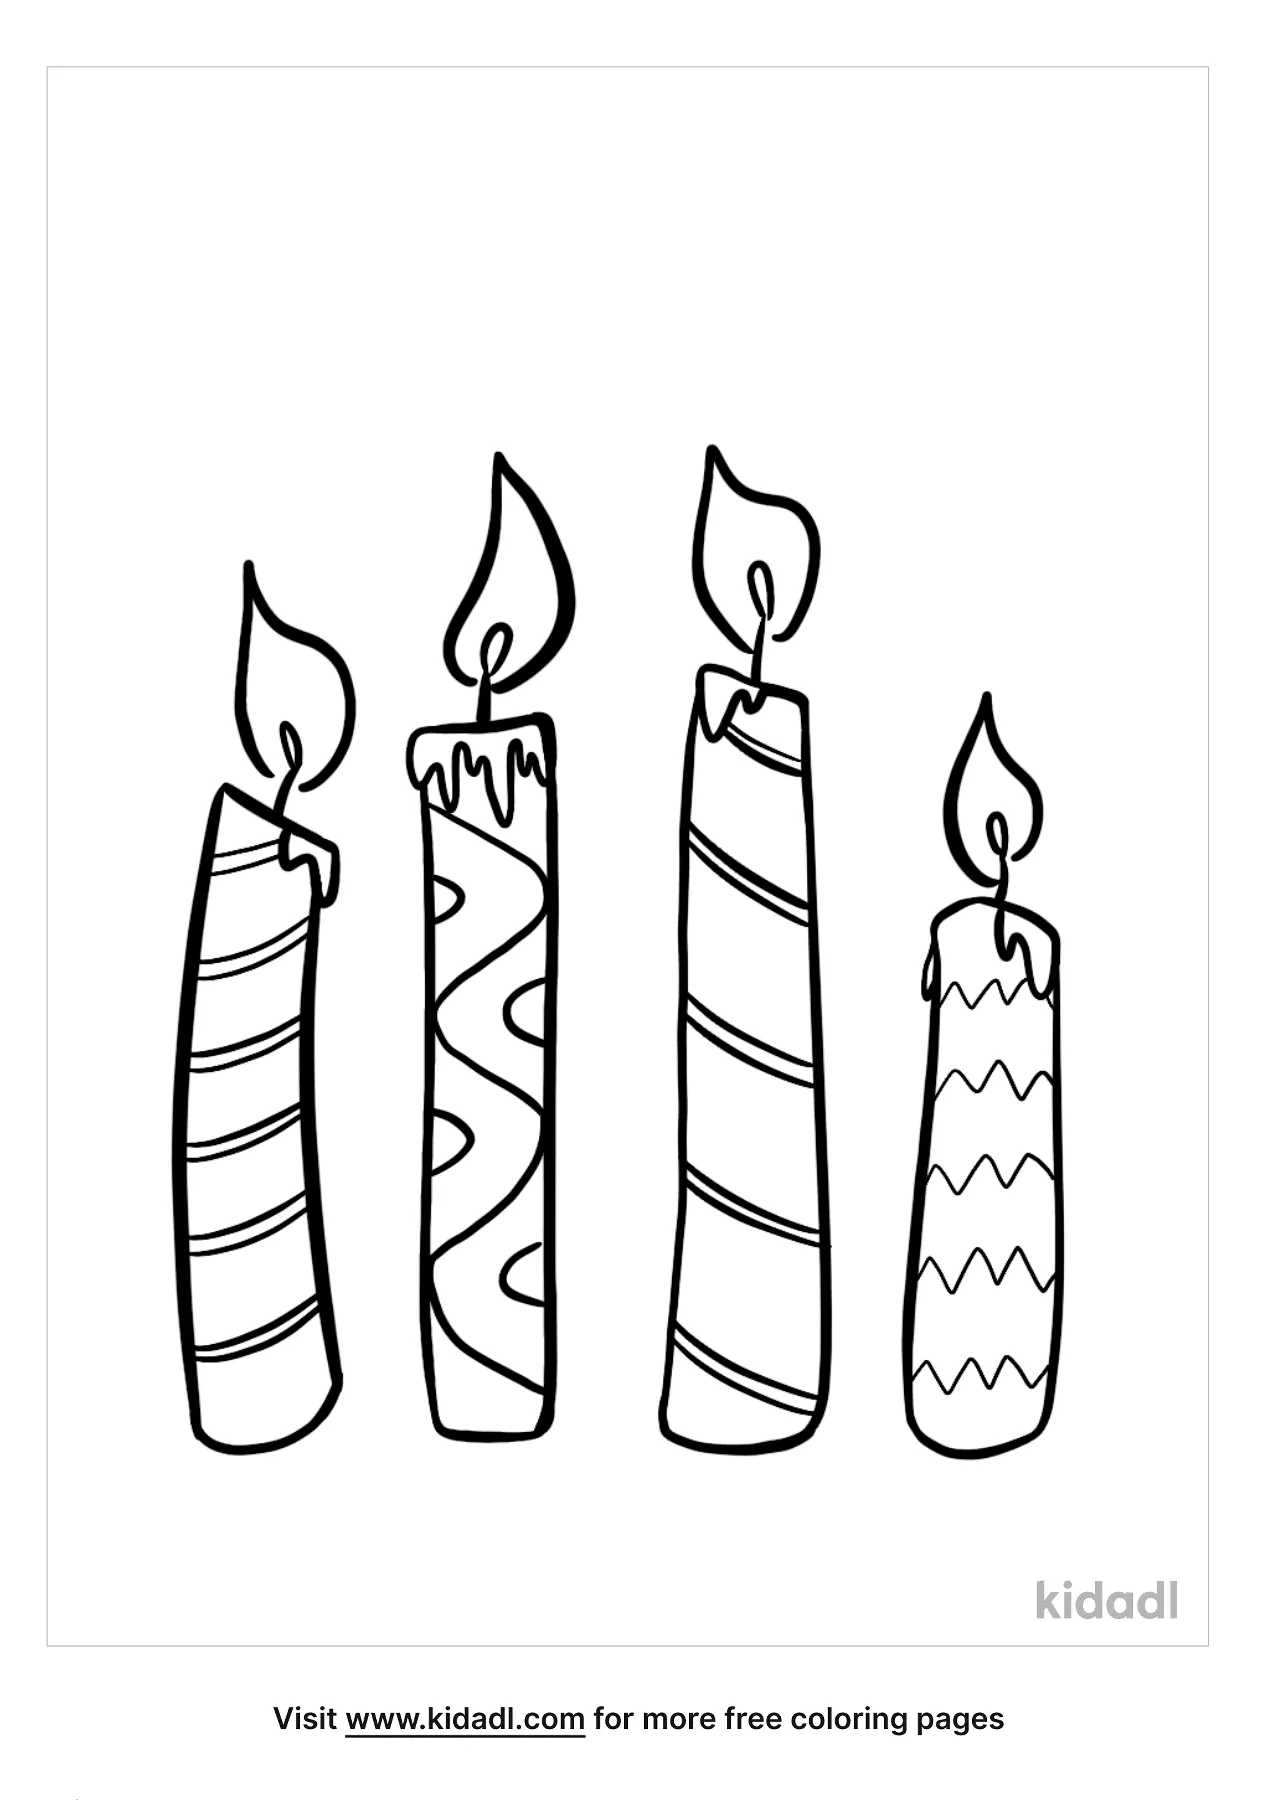 printable-candle-coloring-pages